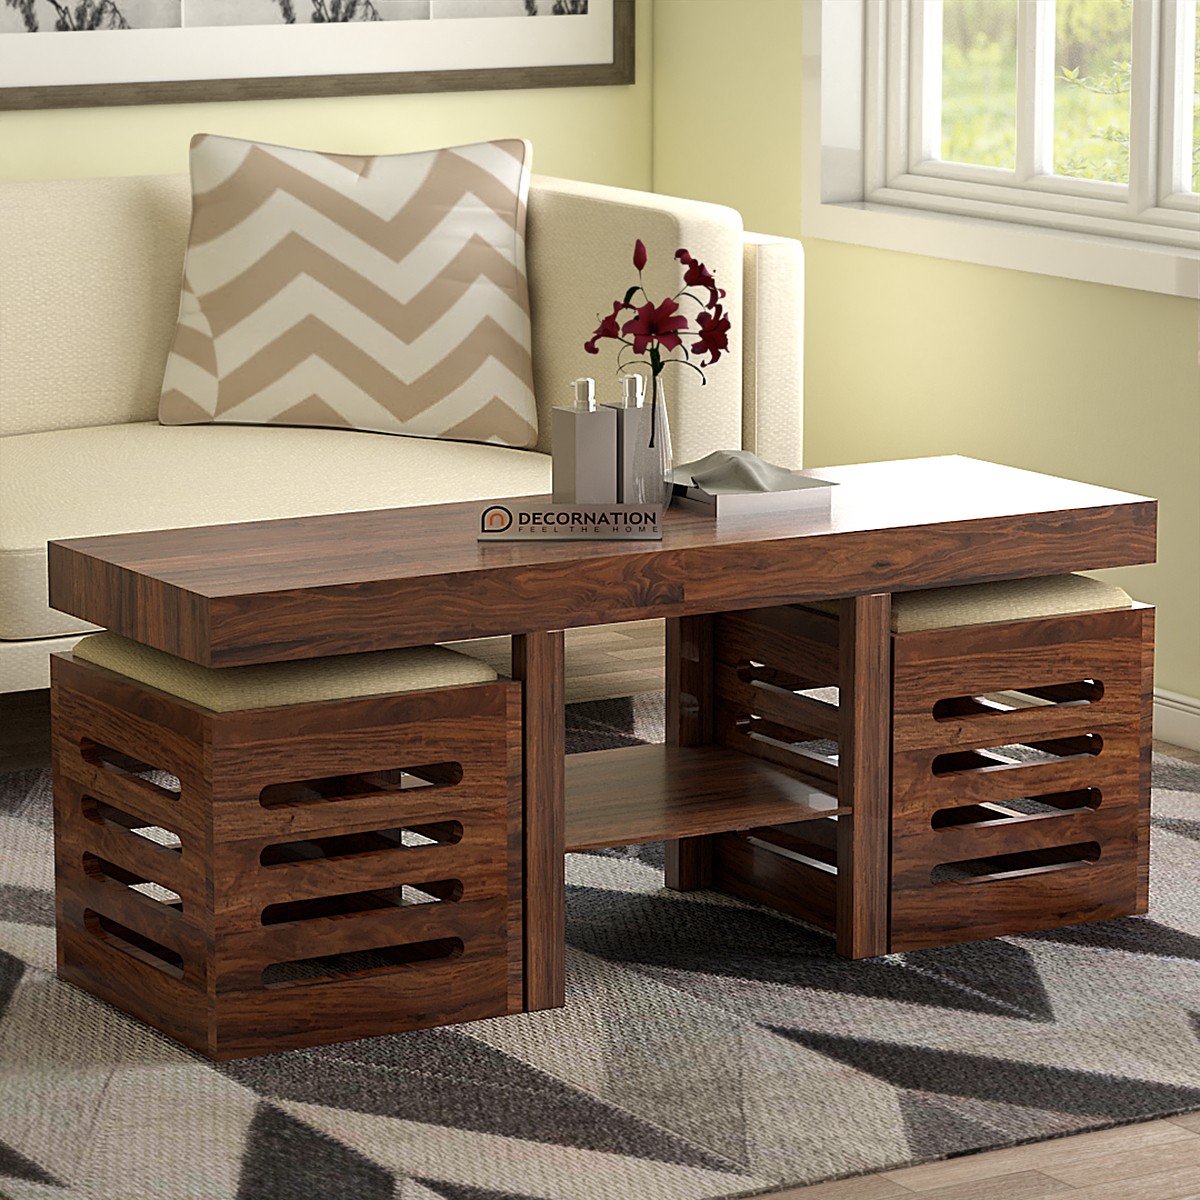 Ely solid wooden coffee table with 2 stools with storage